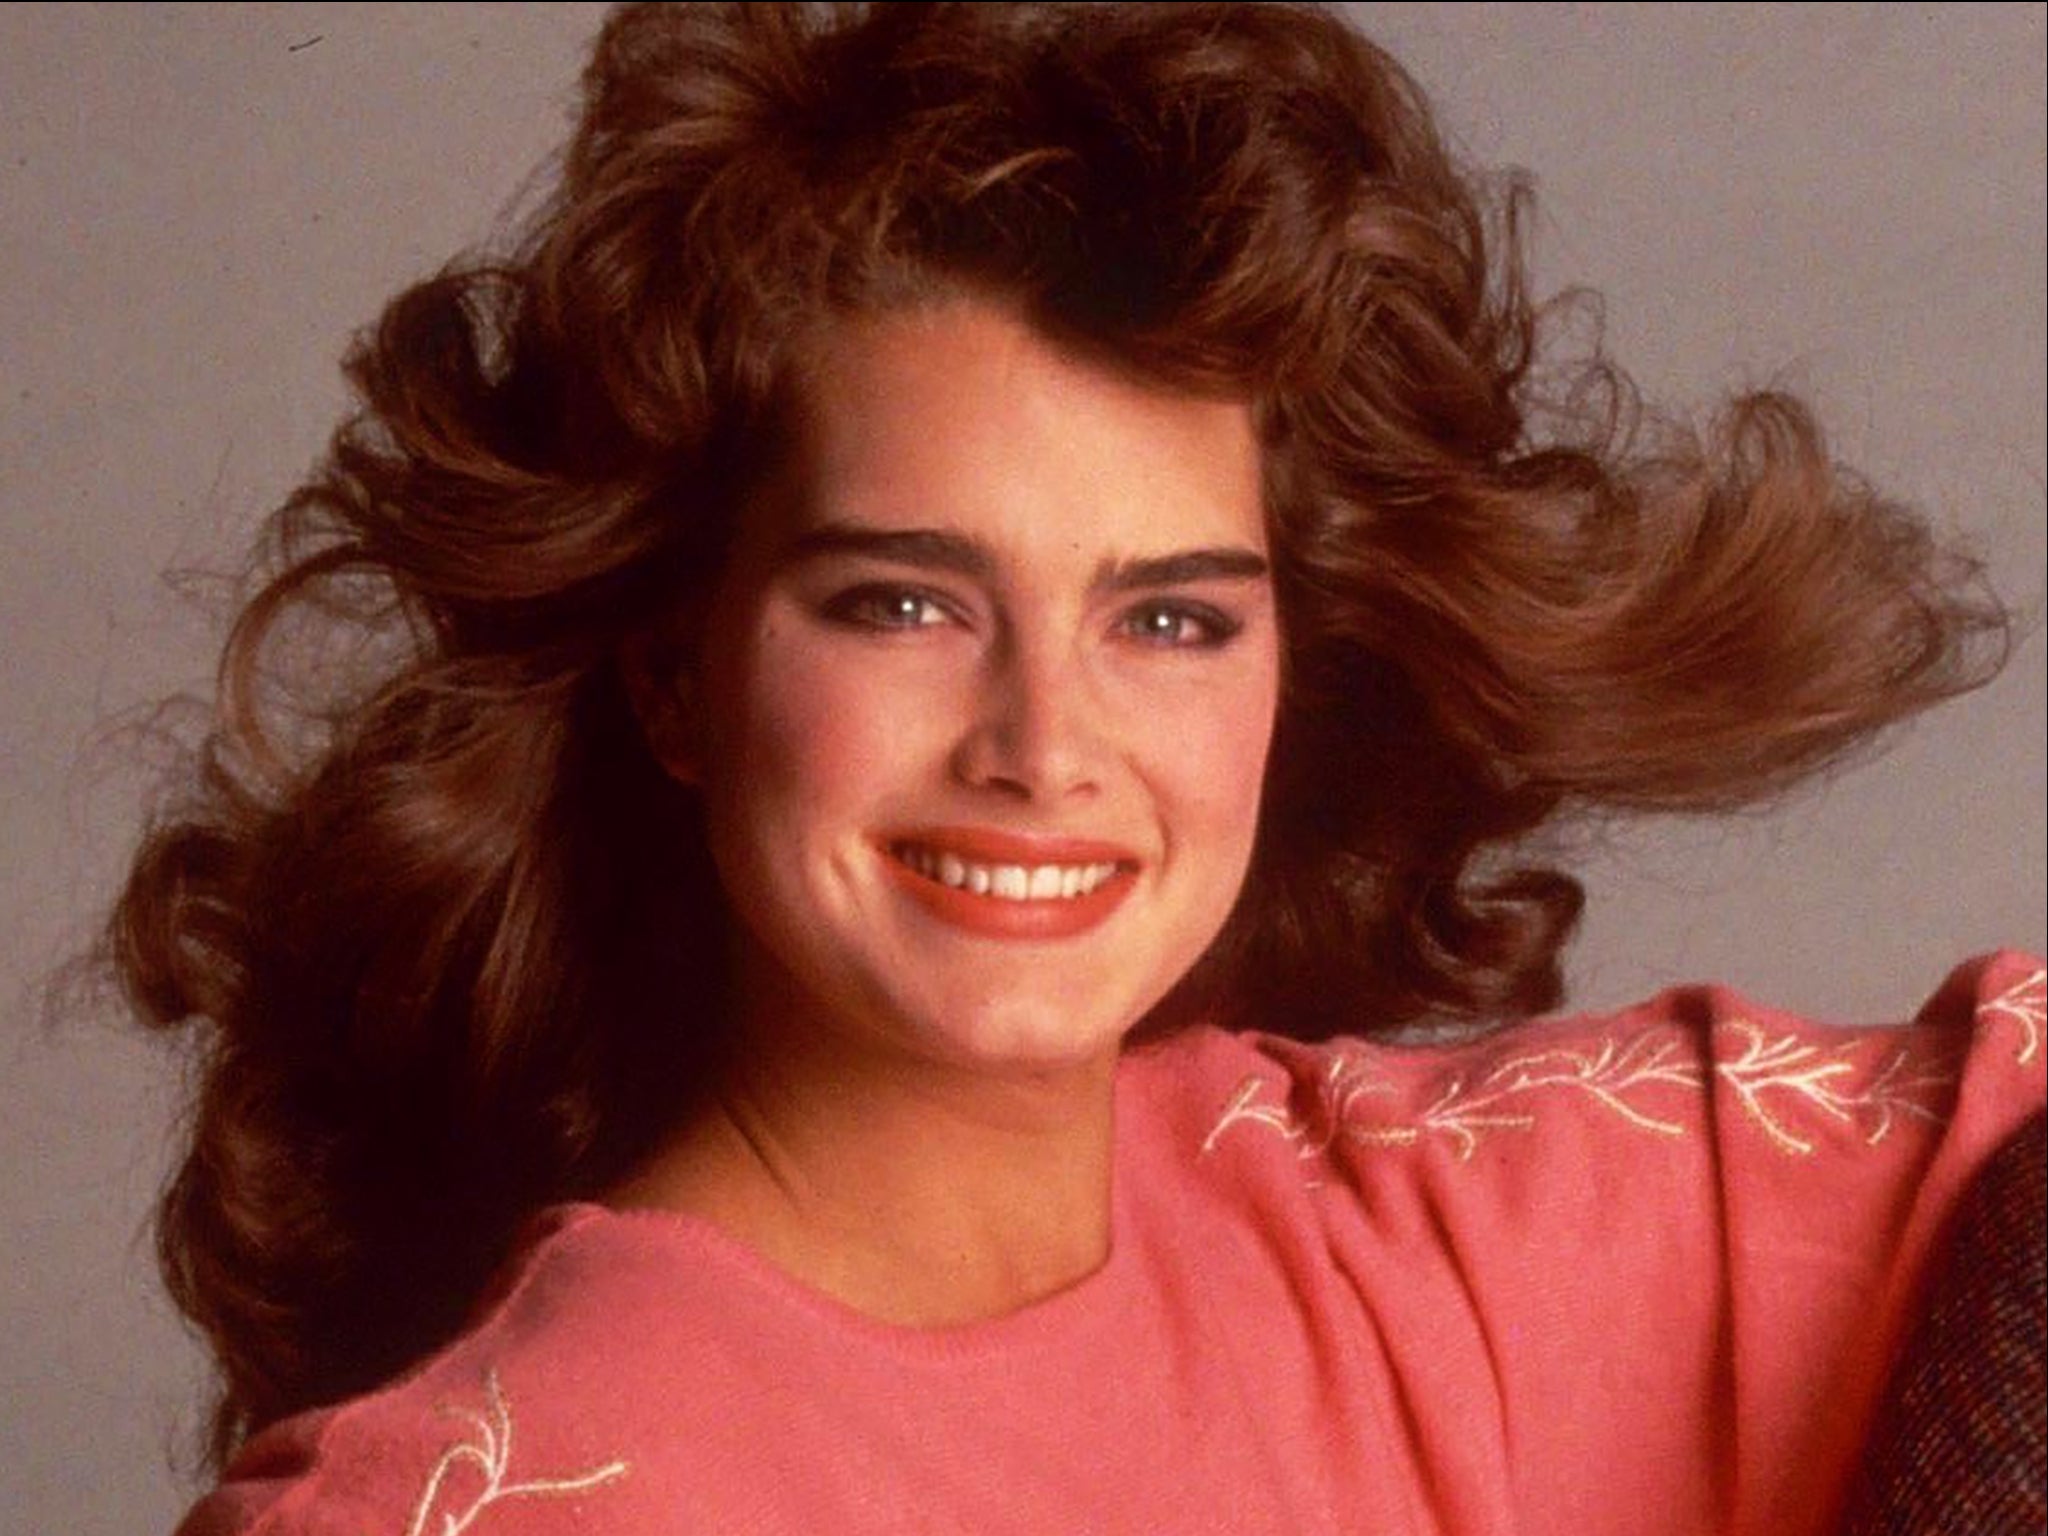 80s Porn Stars Magazines - Pretty Baby: The more you learn about Brooke Shields, the more remarkable  she seems | The Independent